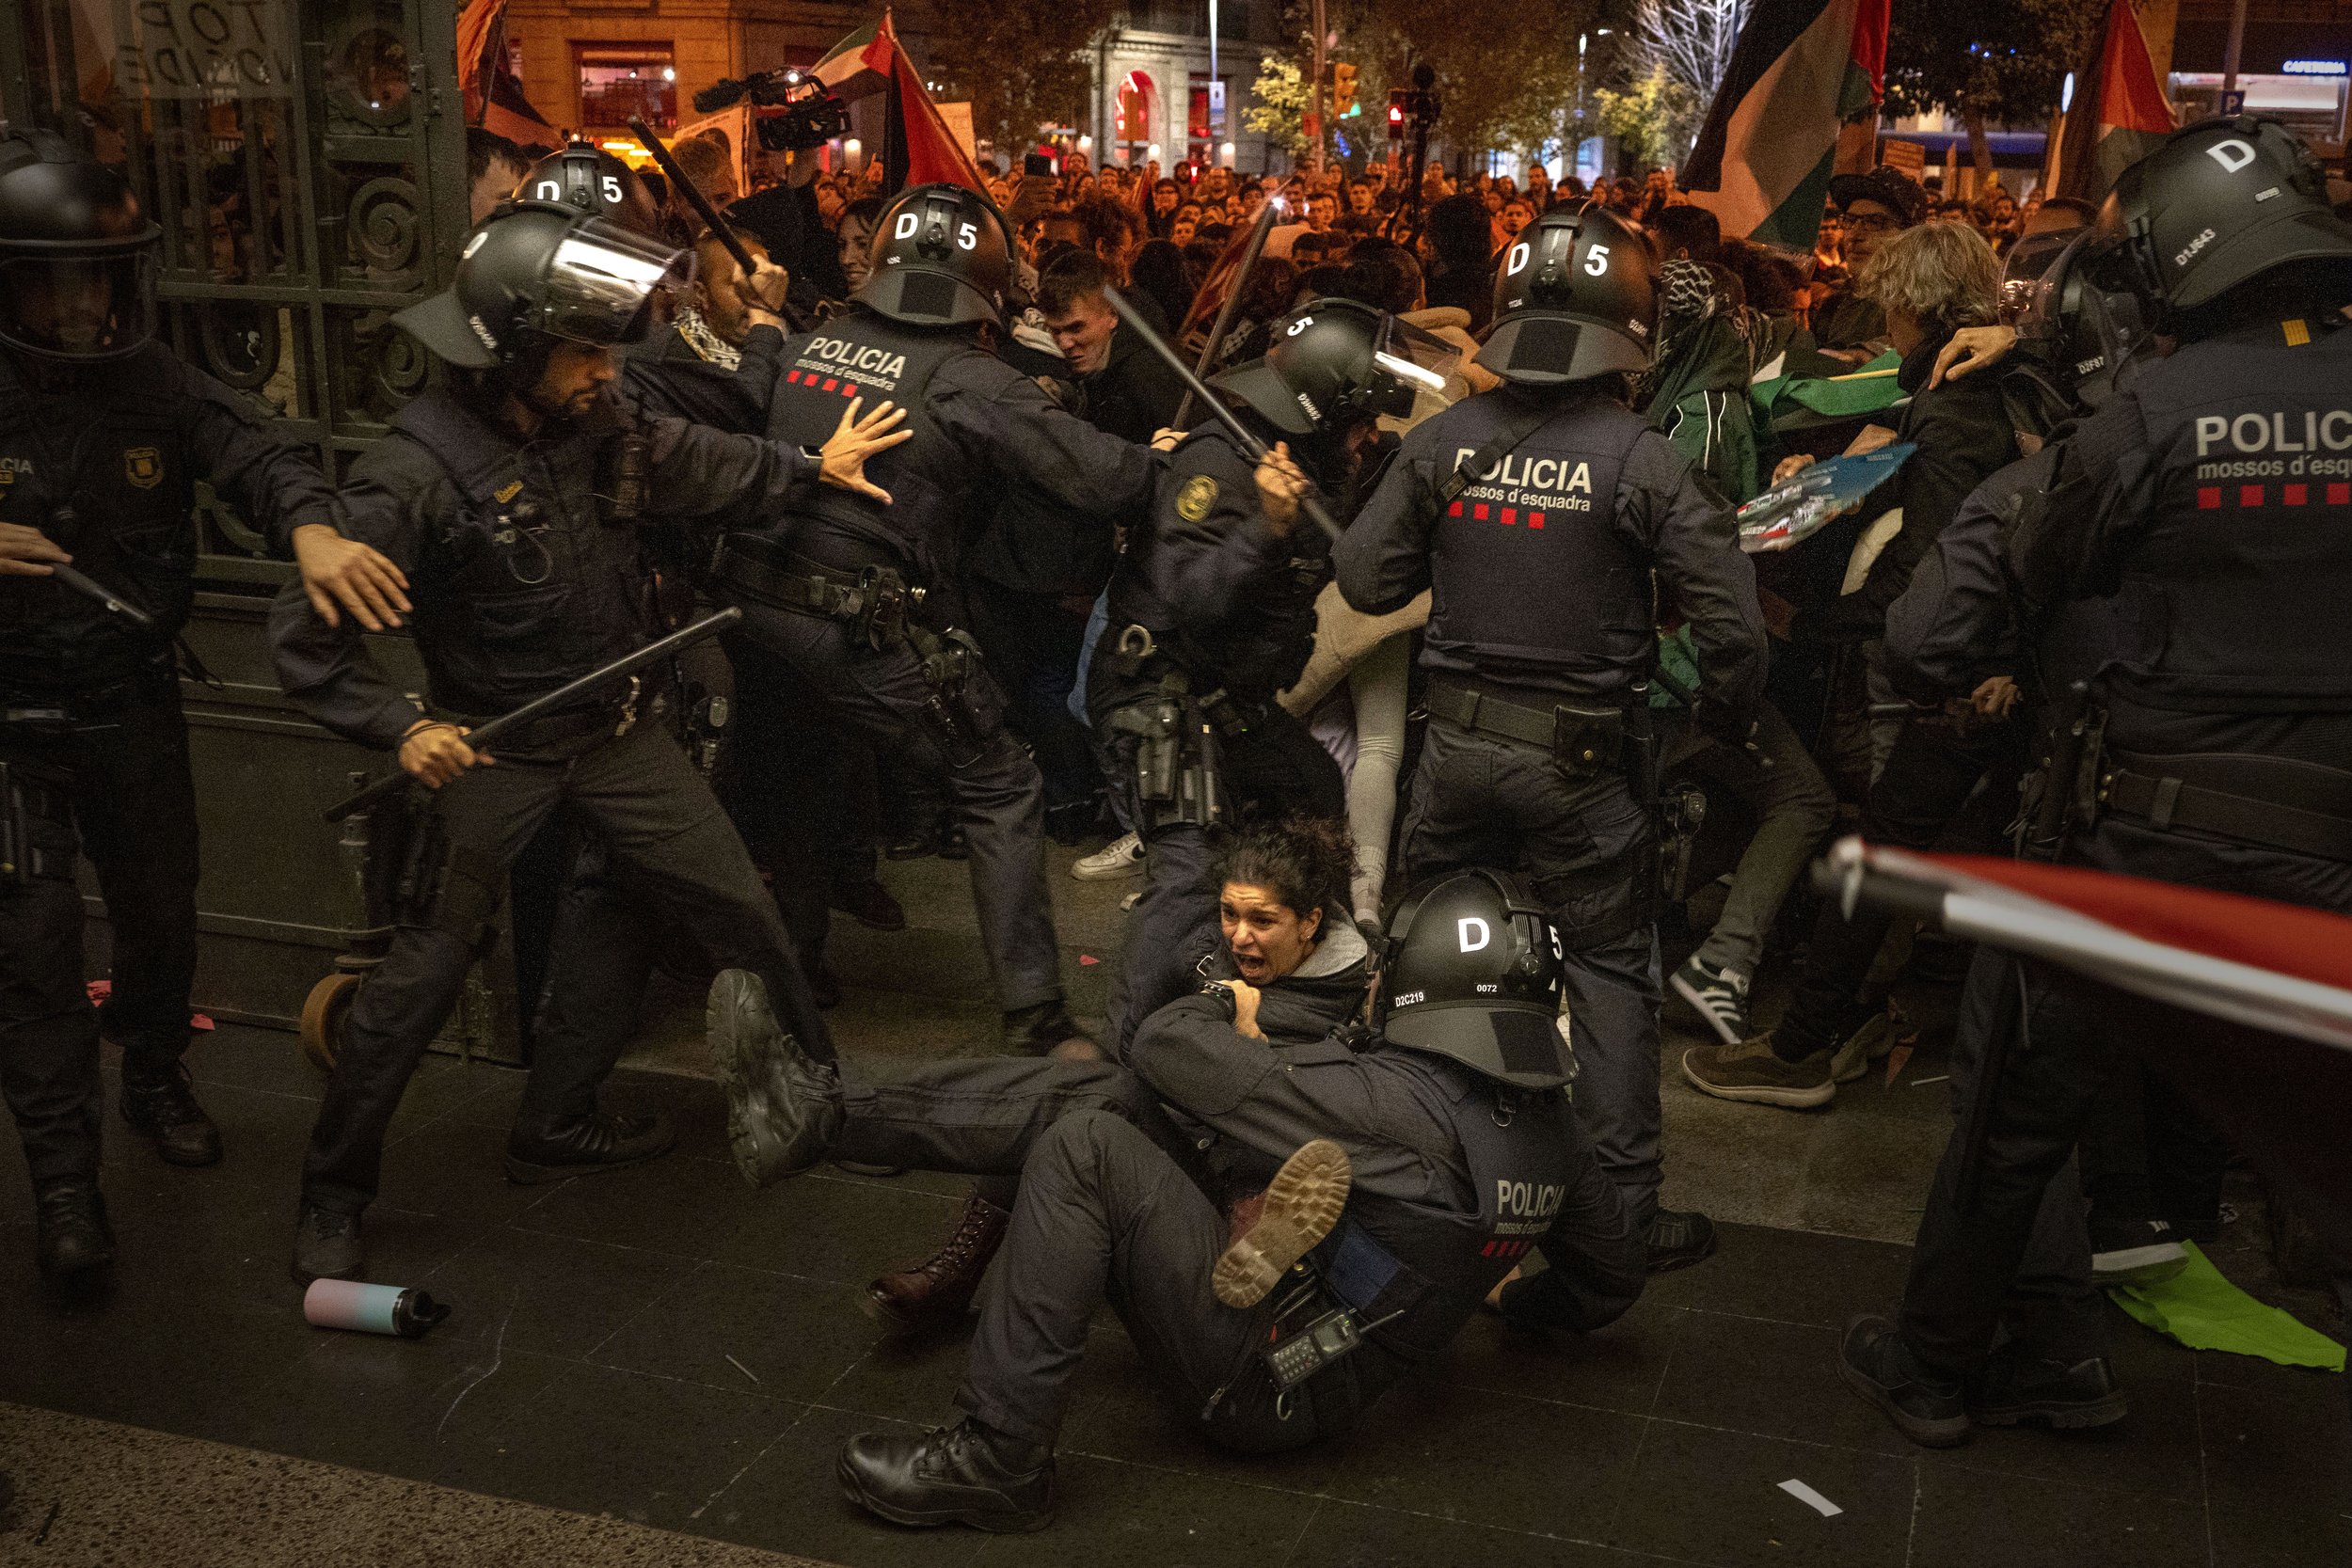  Police officers clash with pro-Palestinian demonstrators trying to enter a train station in Barcelona, Spain, on Nov. 11, 2023. Thousands of protesters had earlier taken part in a march against Israel's response in Gaza to a deadly attack by Hamas o